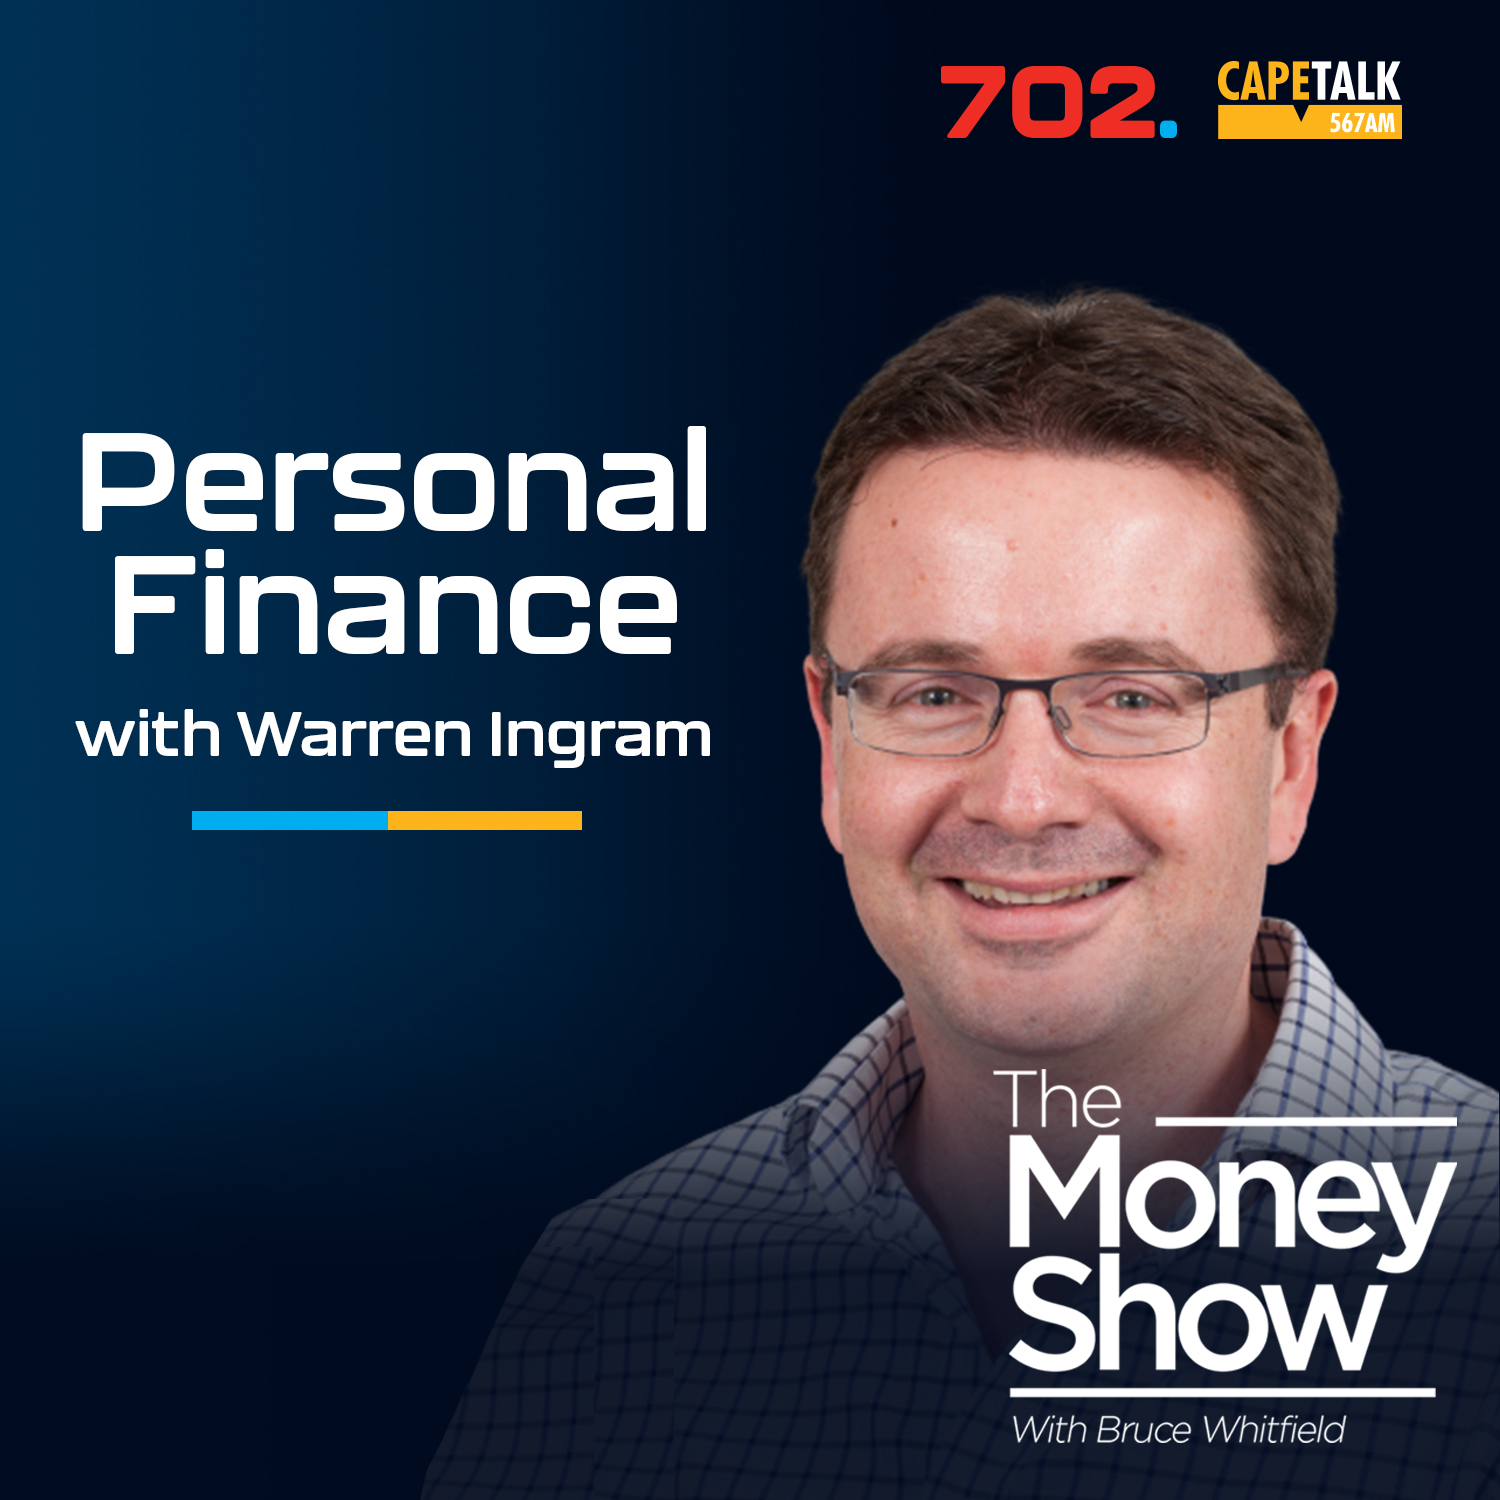 Personal Finance - 2022 was a hectic year, what do we do with our investments that have lost money? [Listener's question CART ARY 6]